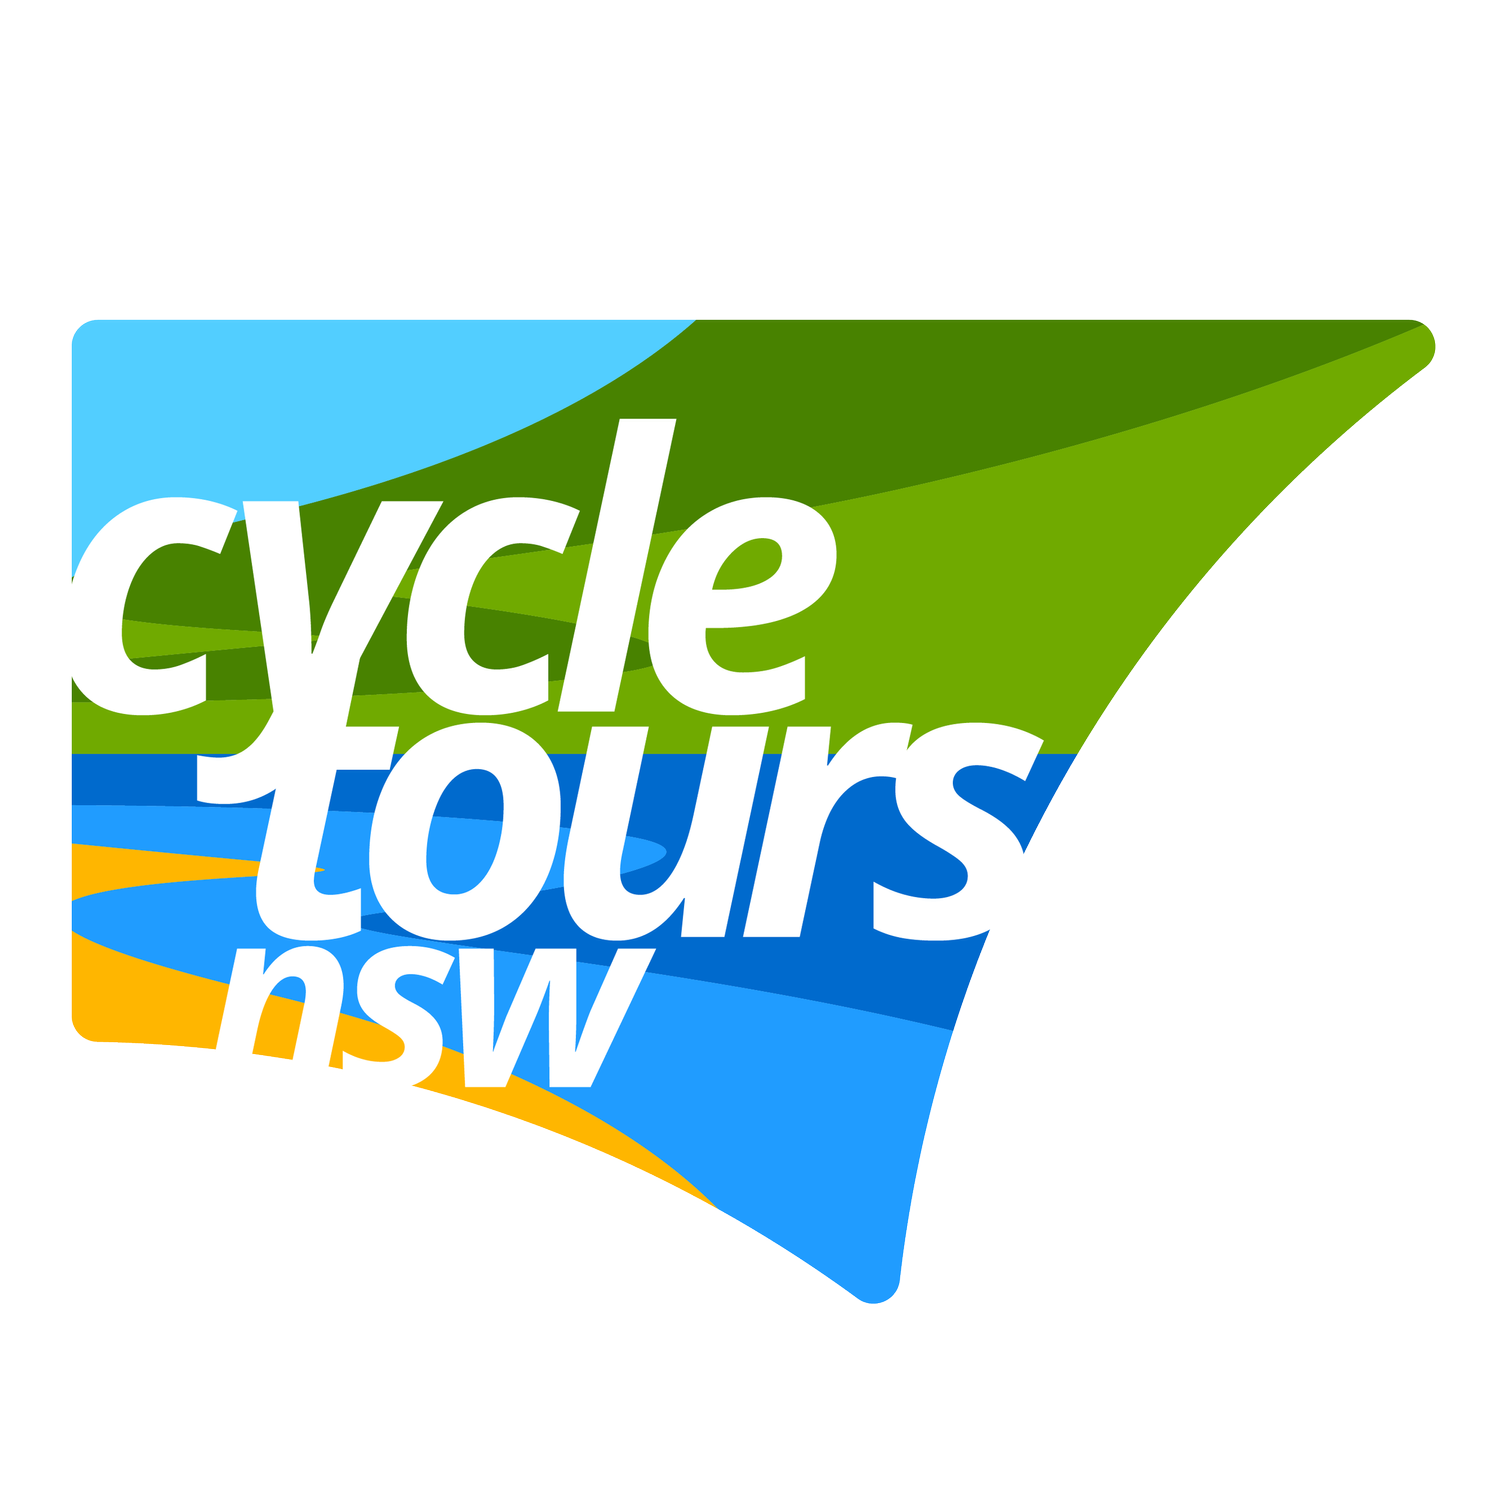 Cycle Tours NSW creating unforgettable experiences